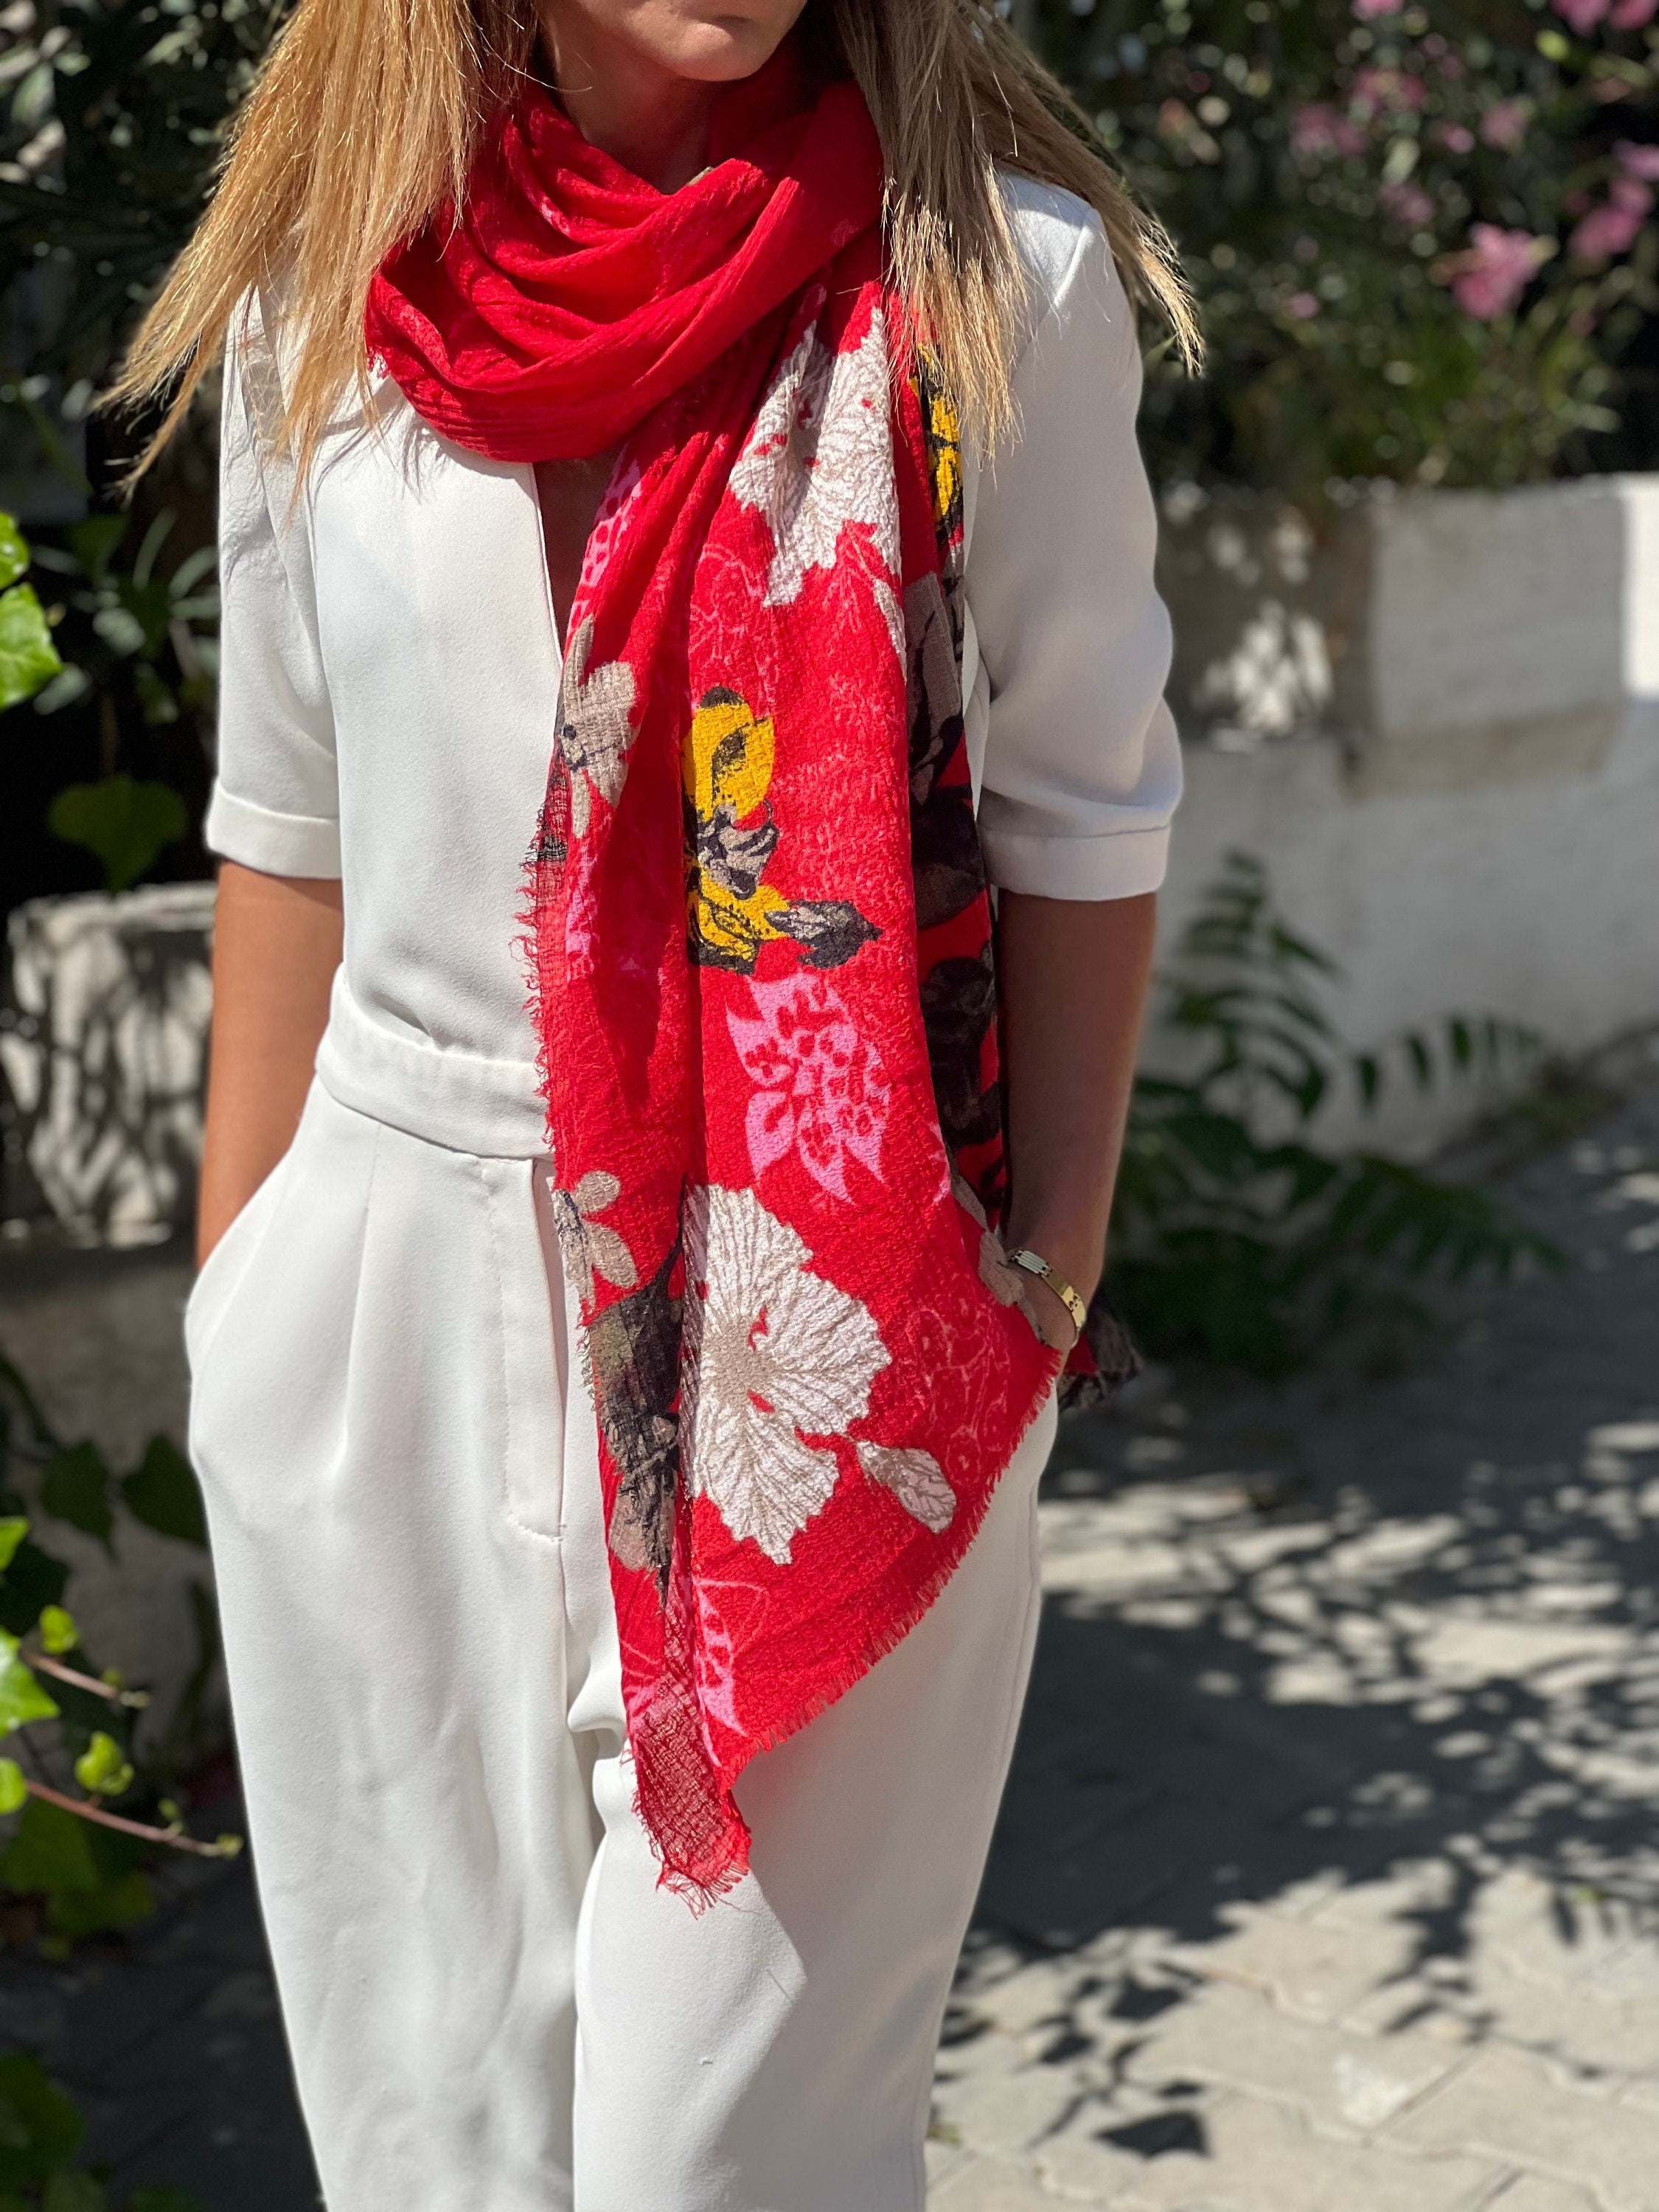 The lightweight cotton material of this scarf makes it perfect for all seasons.